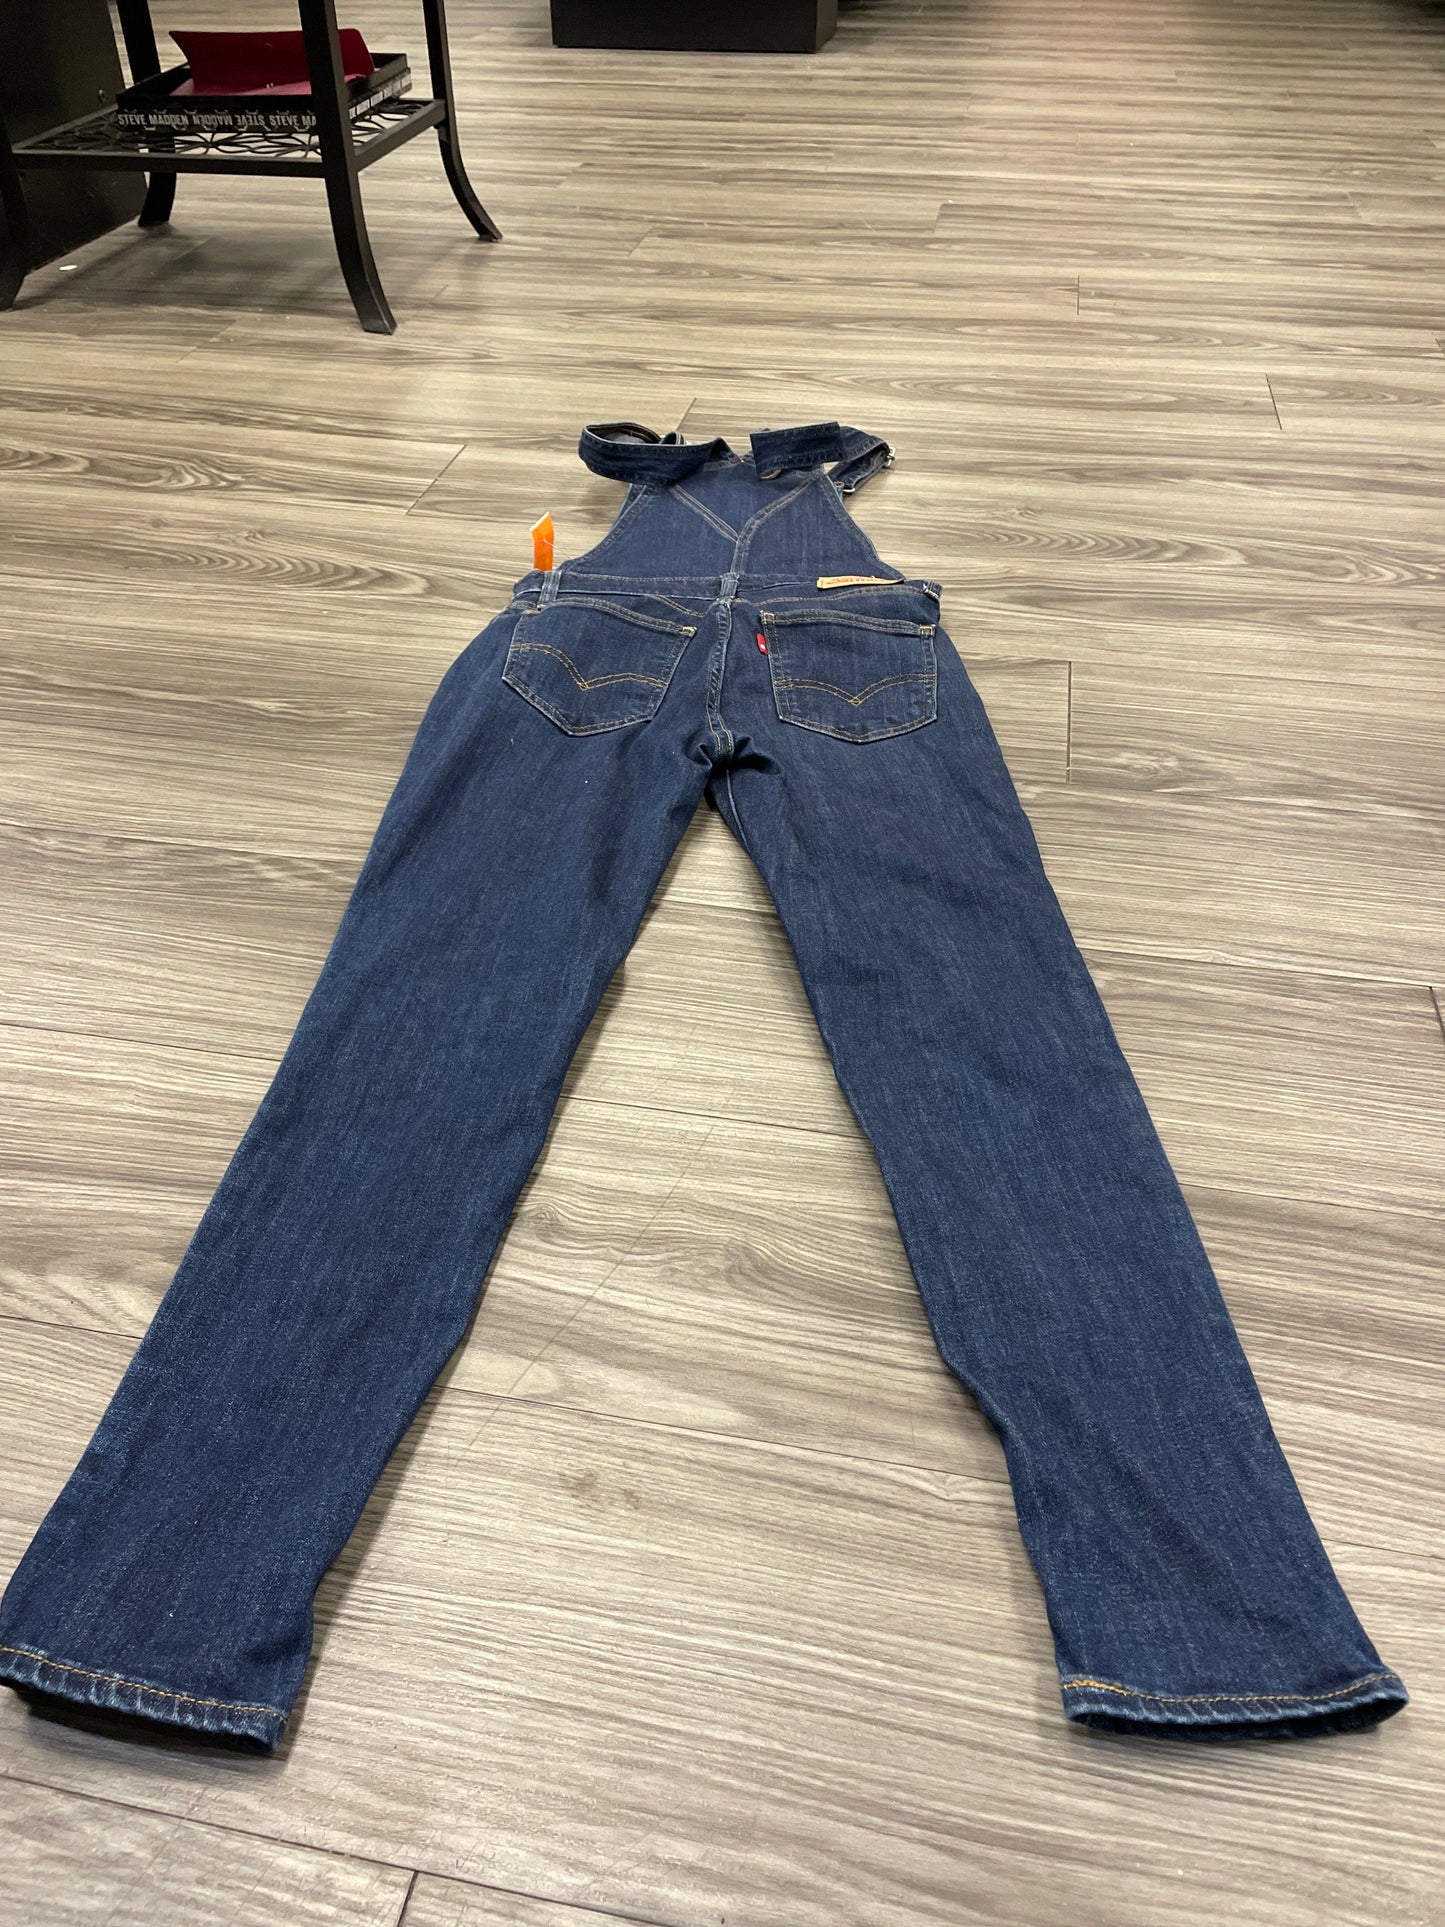 Overalls By Levis  Size: 2